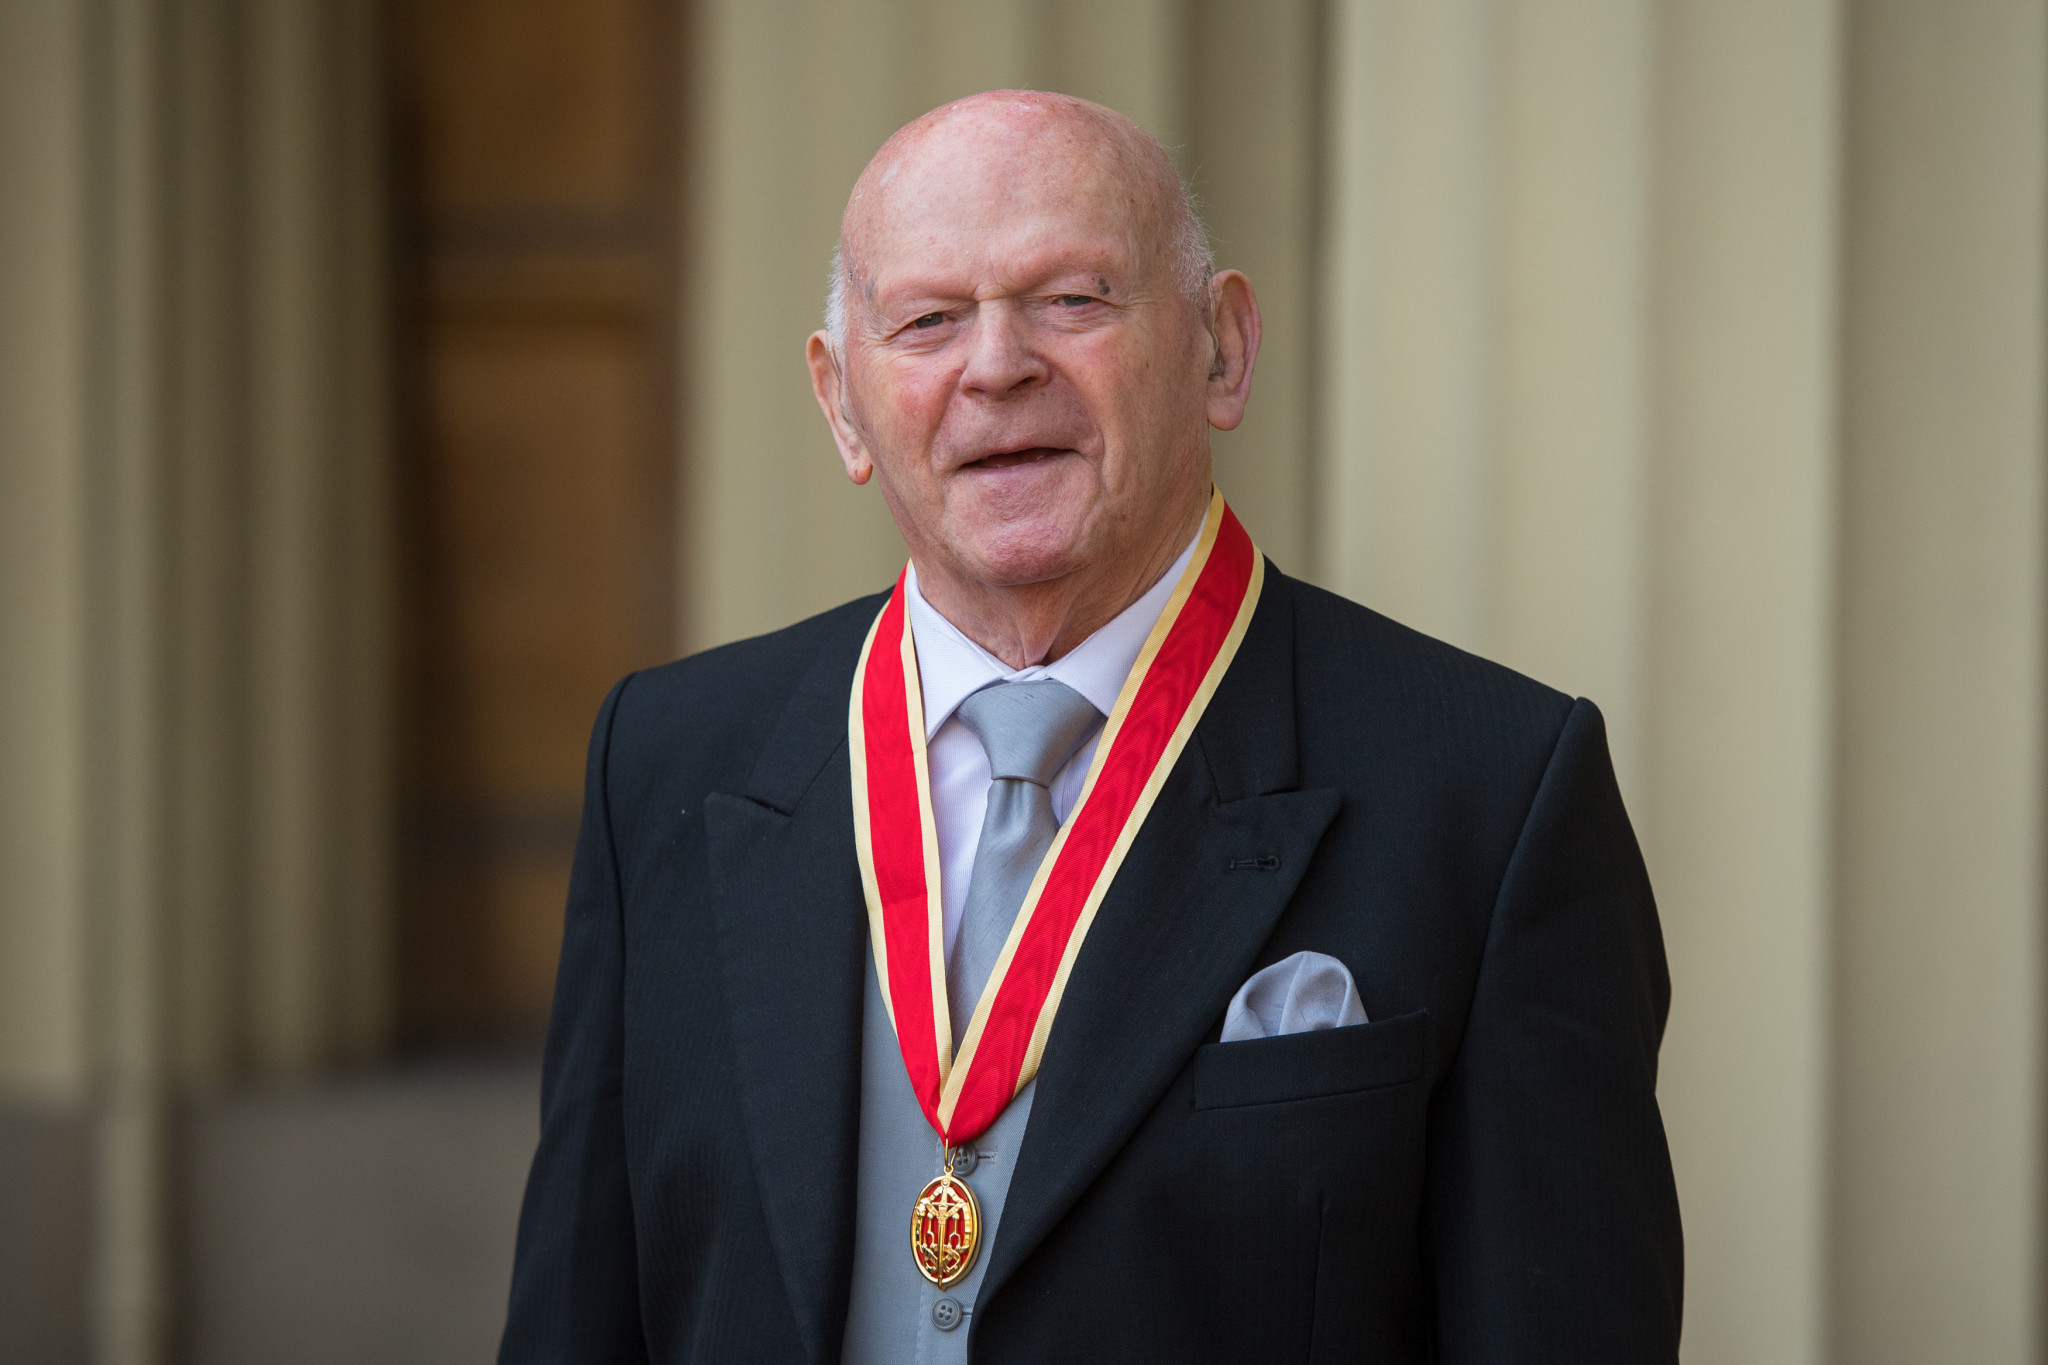 The British delegation reflected on the life of Holocaust survivor Sir Ben Helfgott, who represented Britain at two Olympics and died earlier this month ©Getty Images